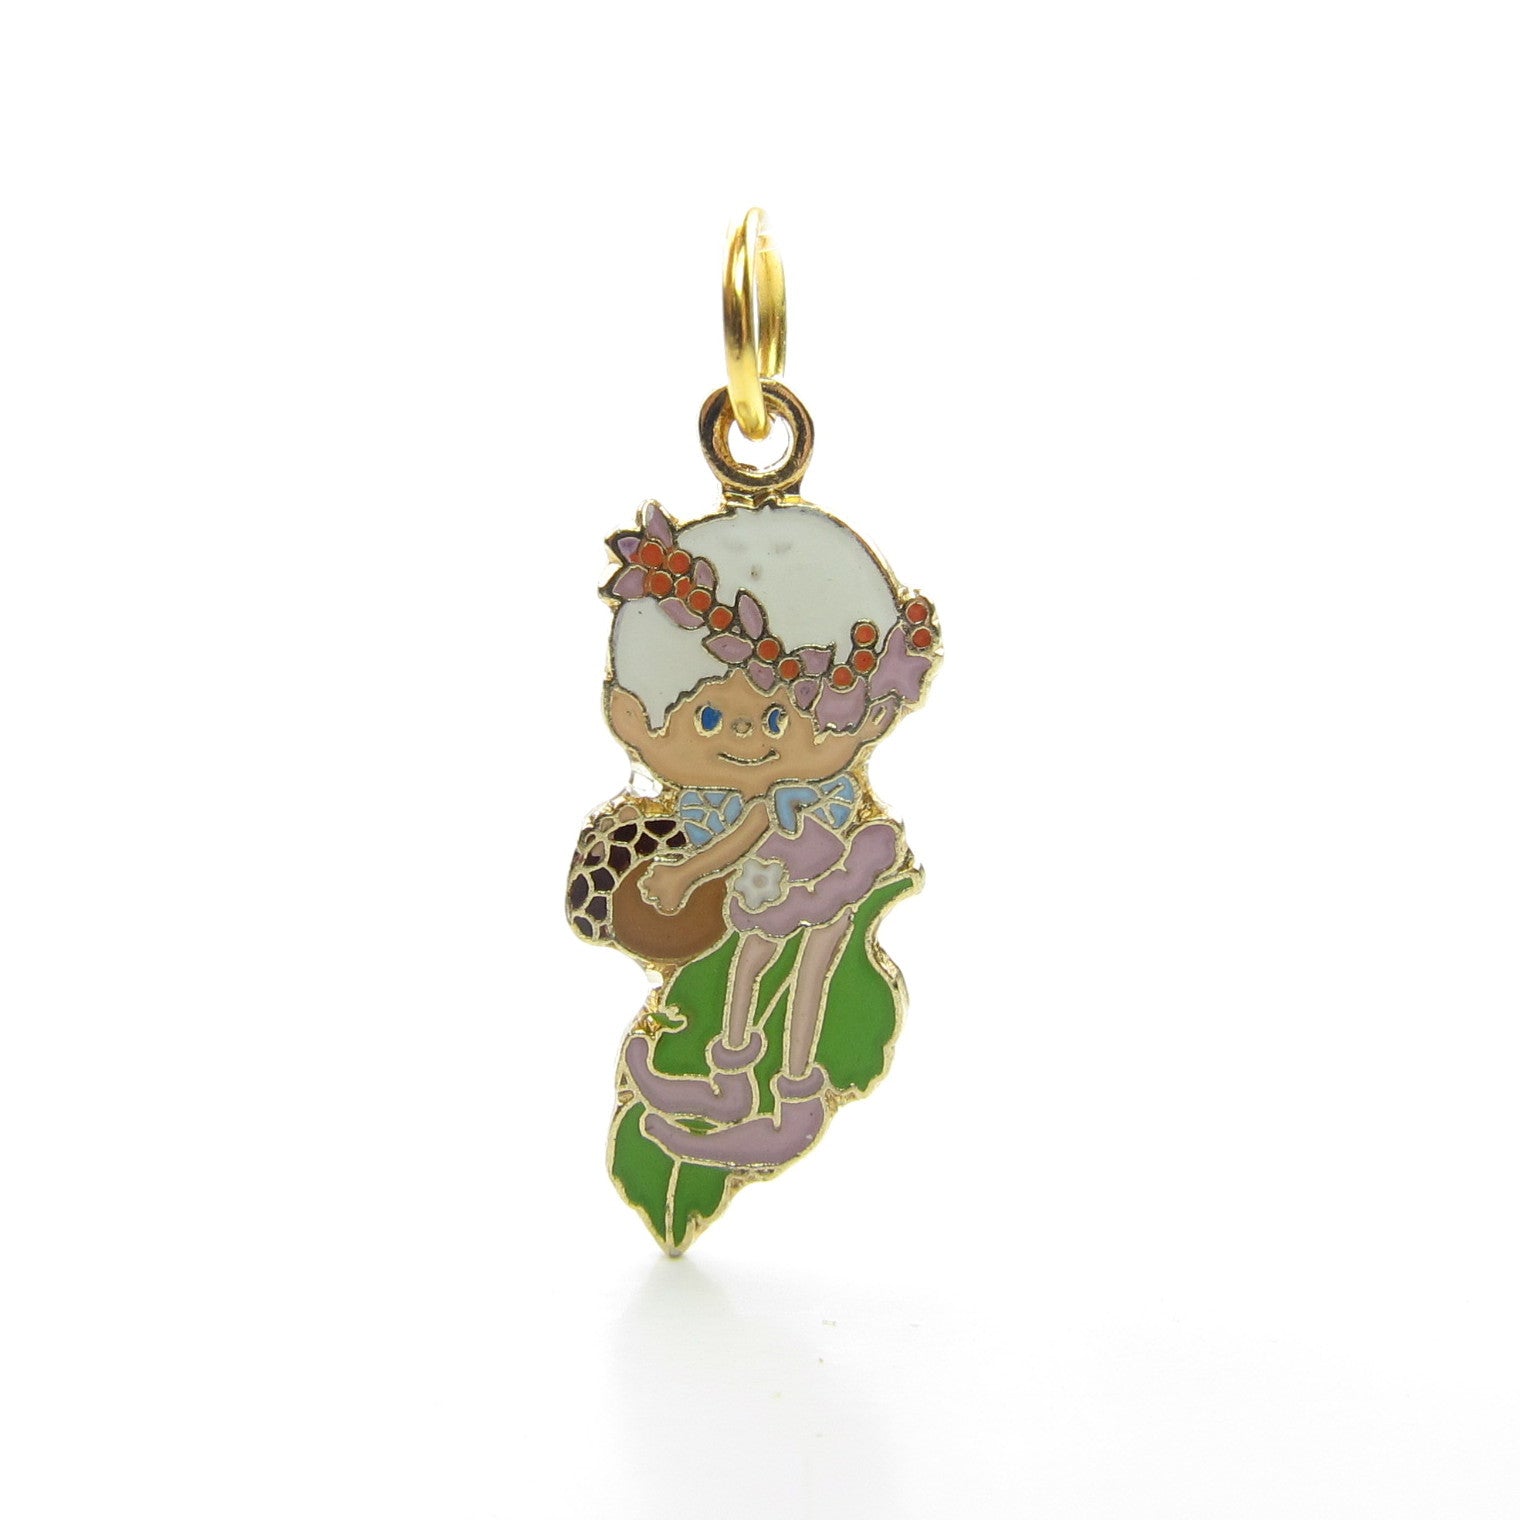 Snowdrop charm or pendant Herself the Elf jewelry